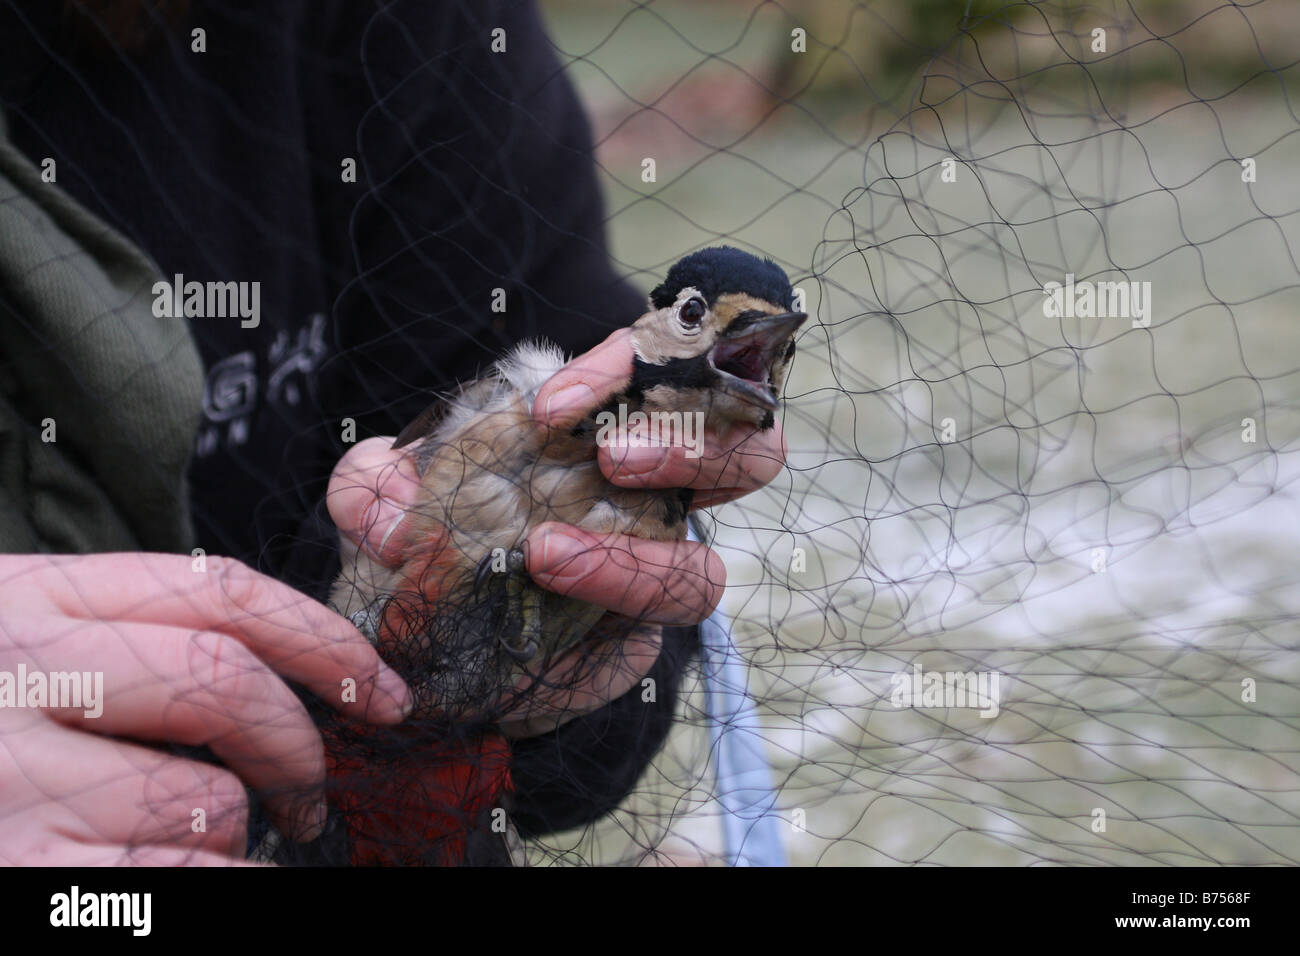 Greater spotted woodpecker shouts as it is freed from a bird ringers' net Stock Photo